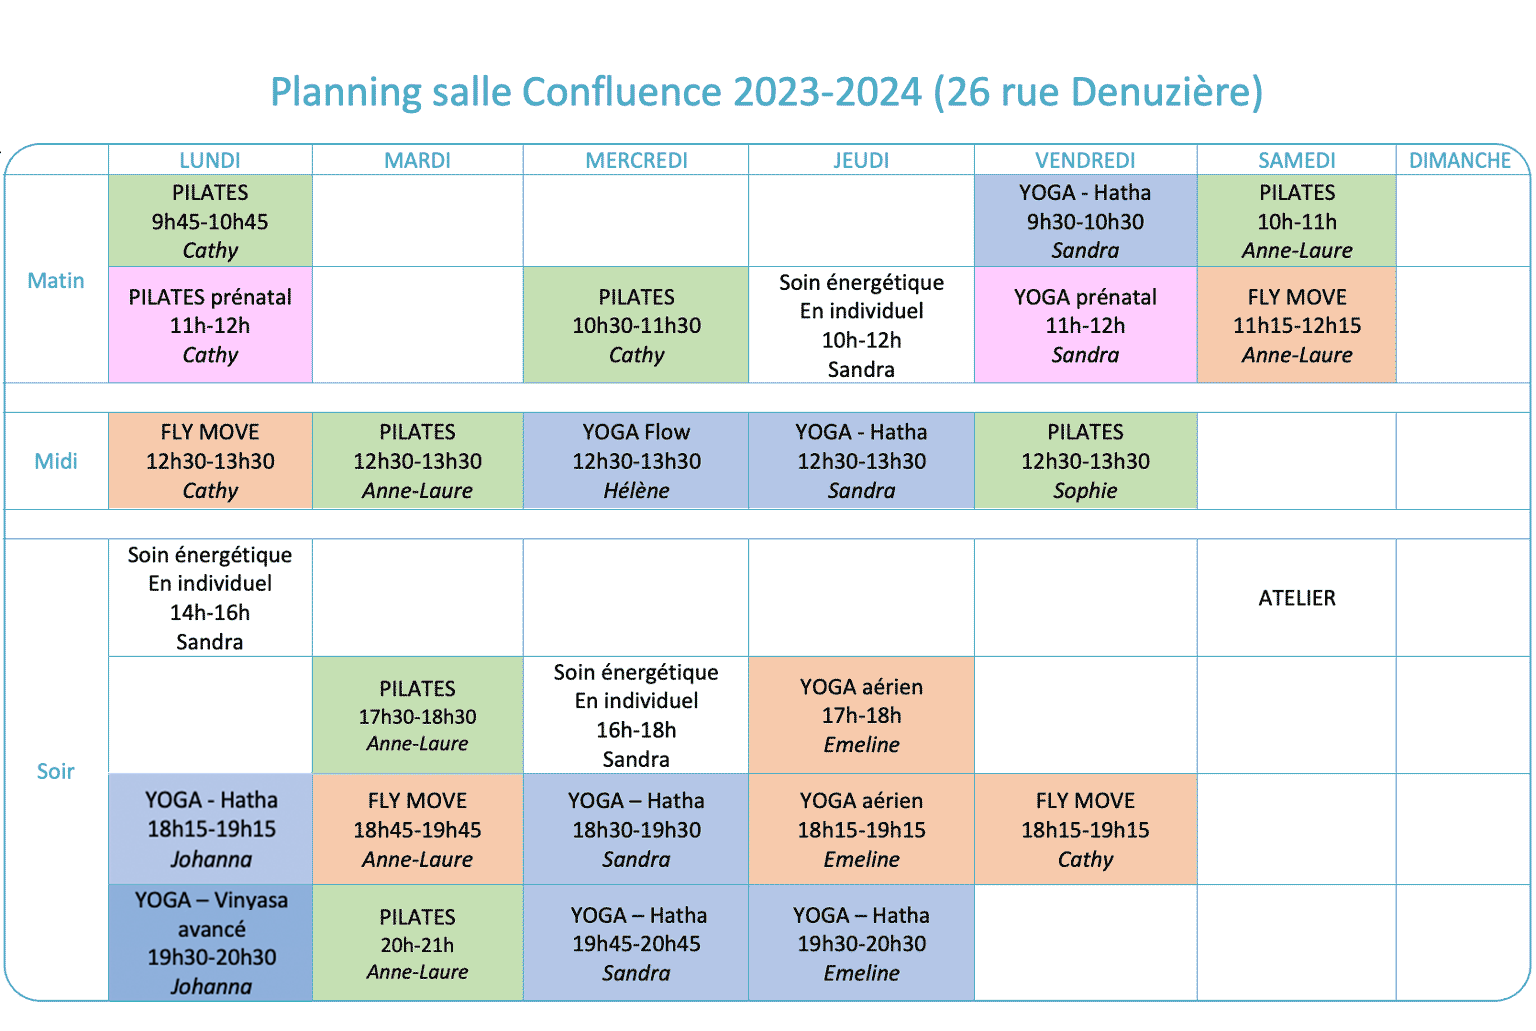 Planning Small Confluence-2023-2024